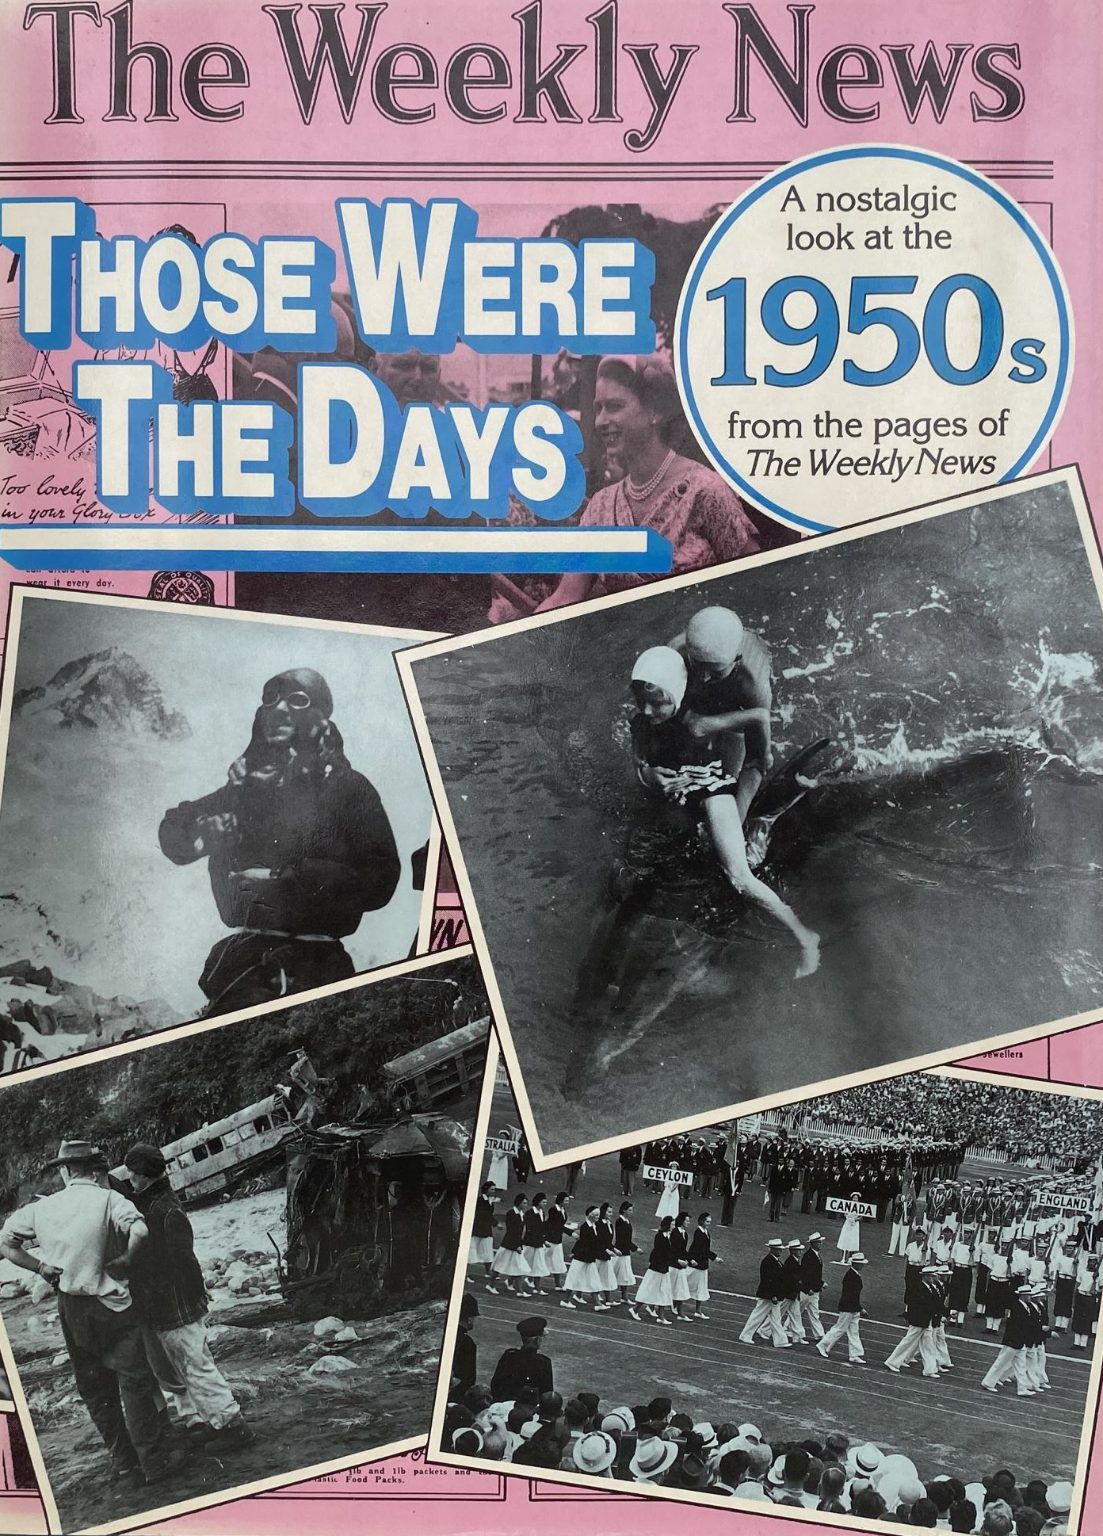 THOSE WERE THE DAYS: A nostalgic look at The Weekly News 1950s